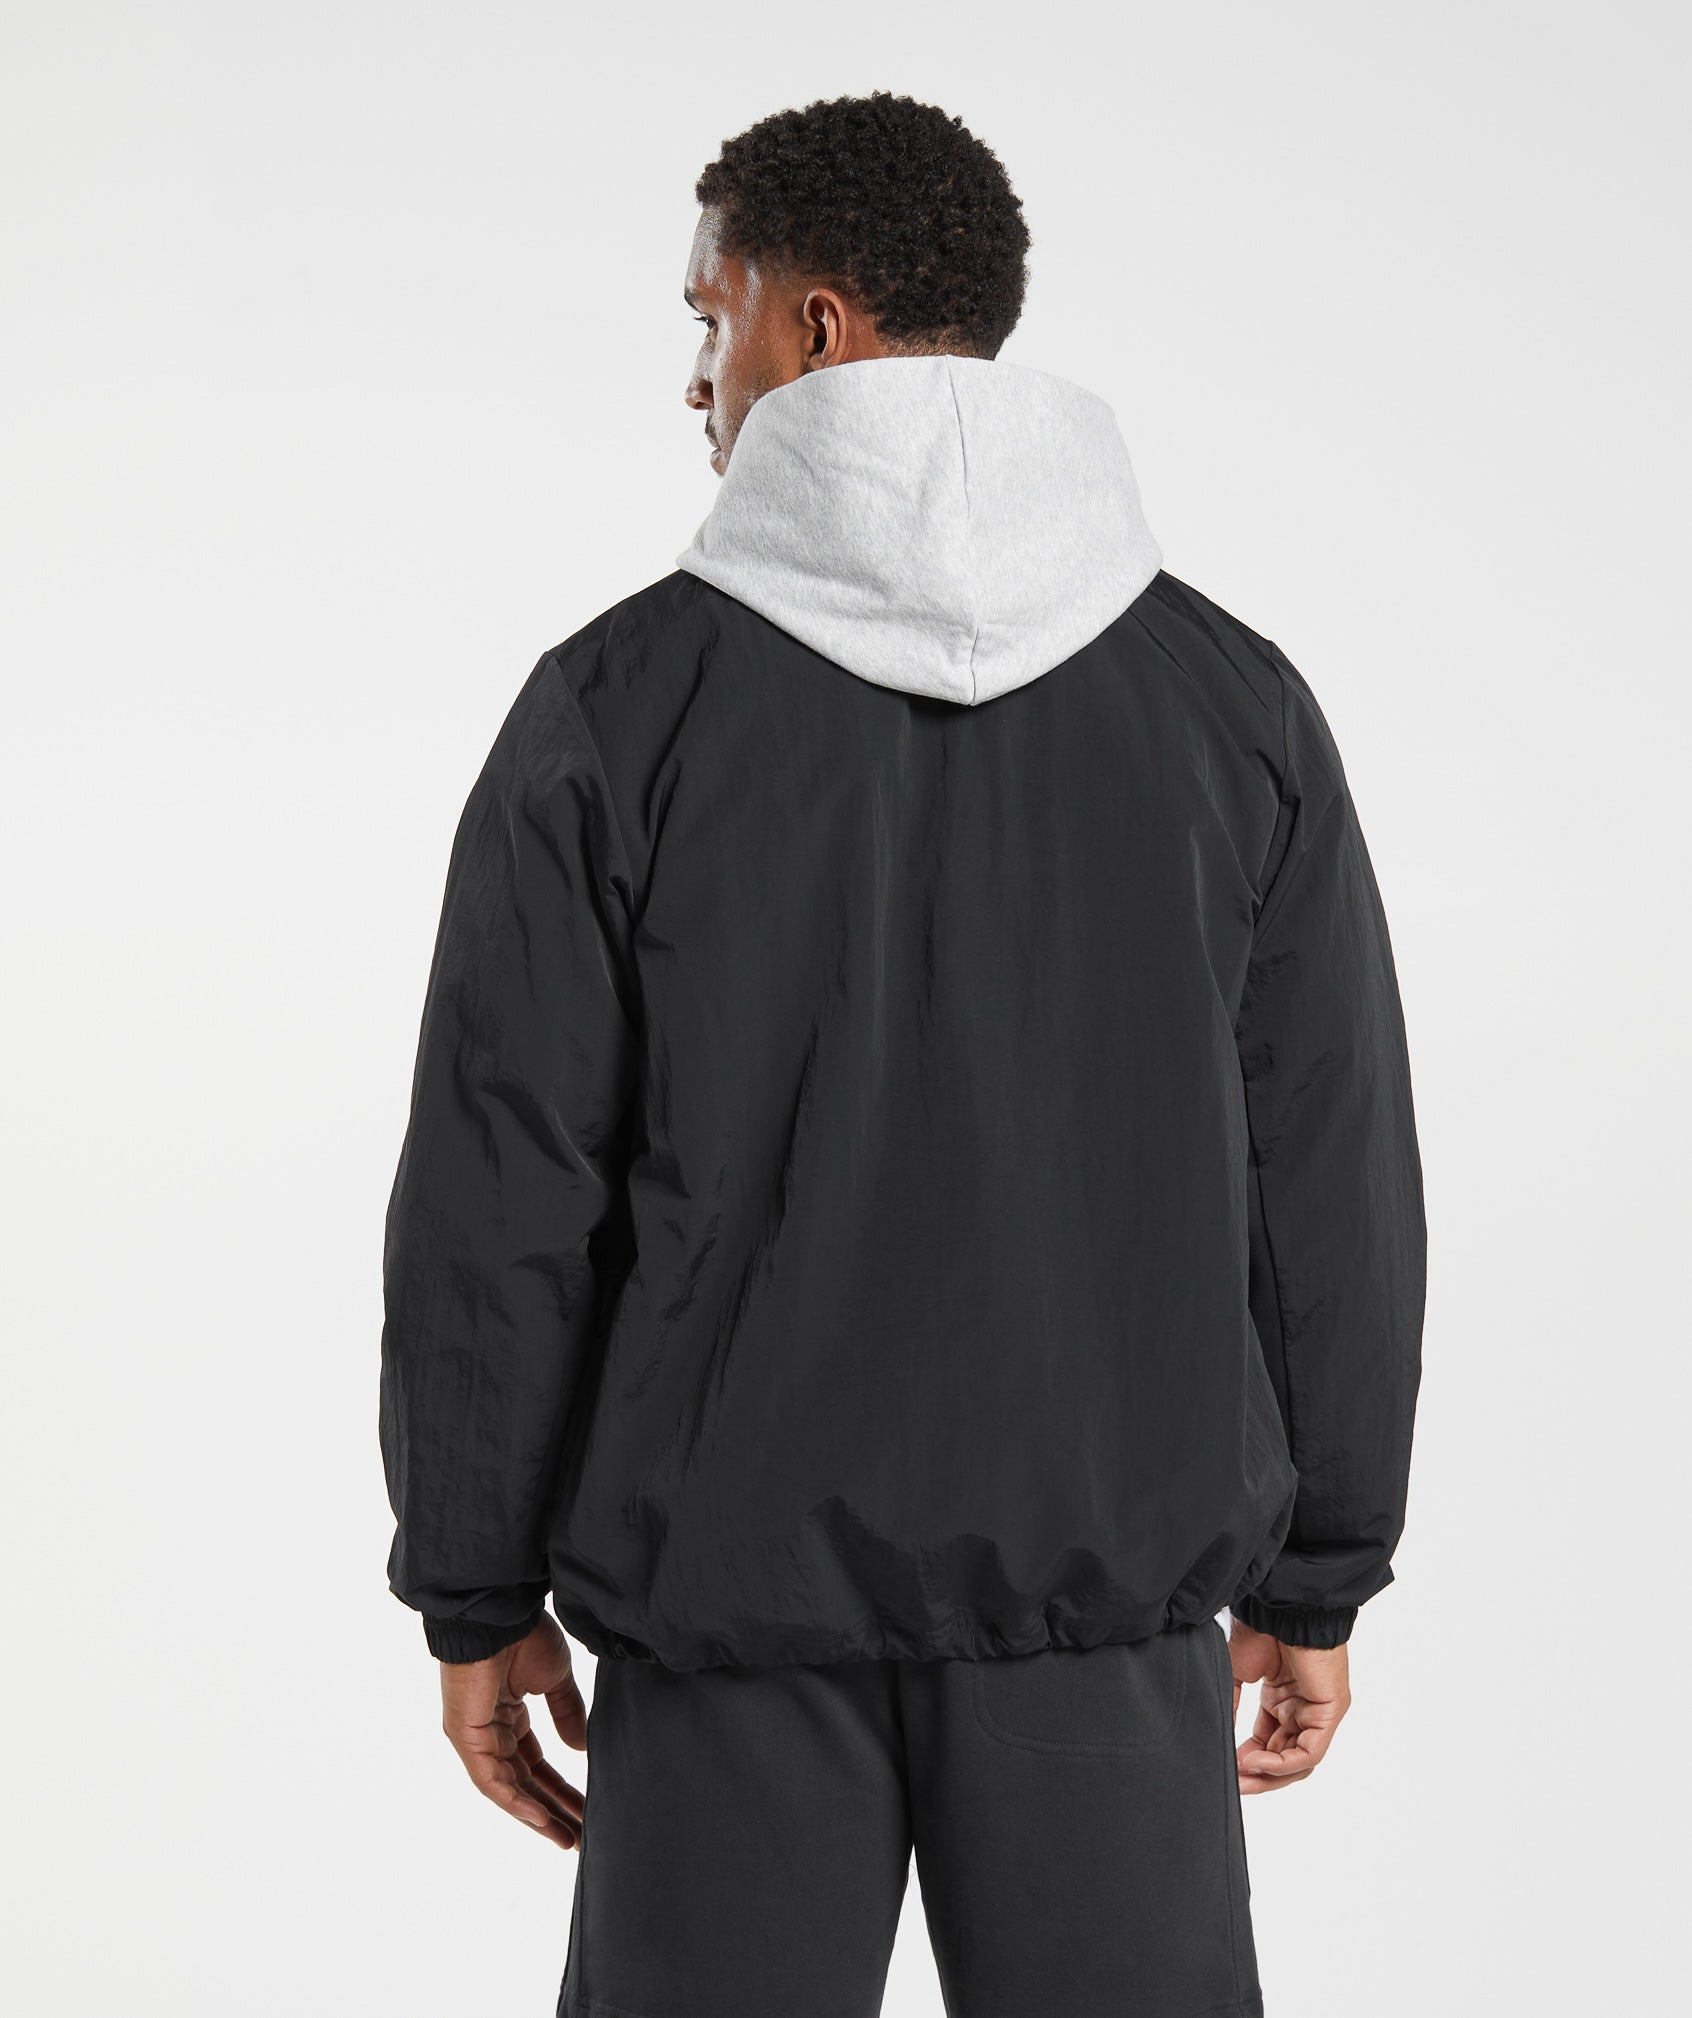 Rest Day Commute Jacket in Black - view 2